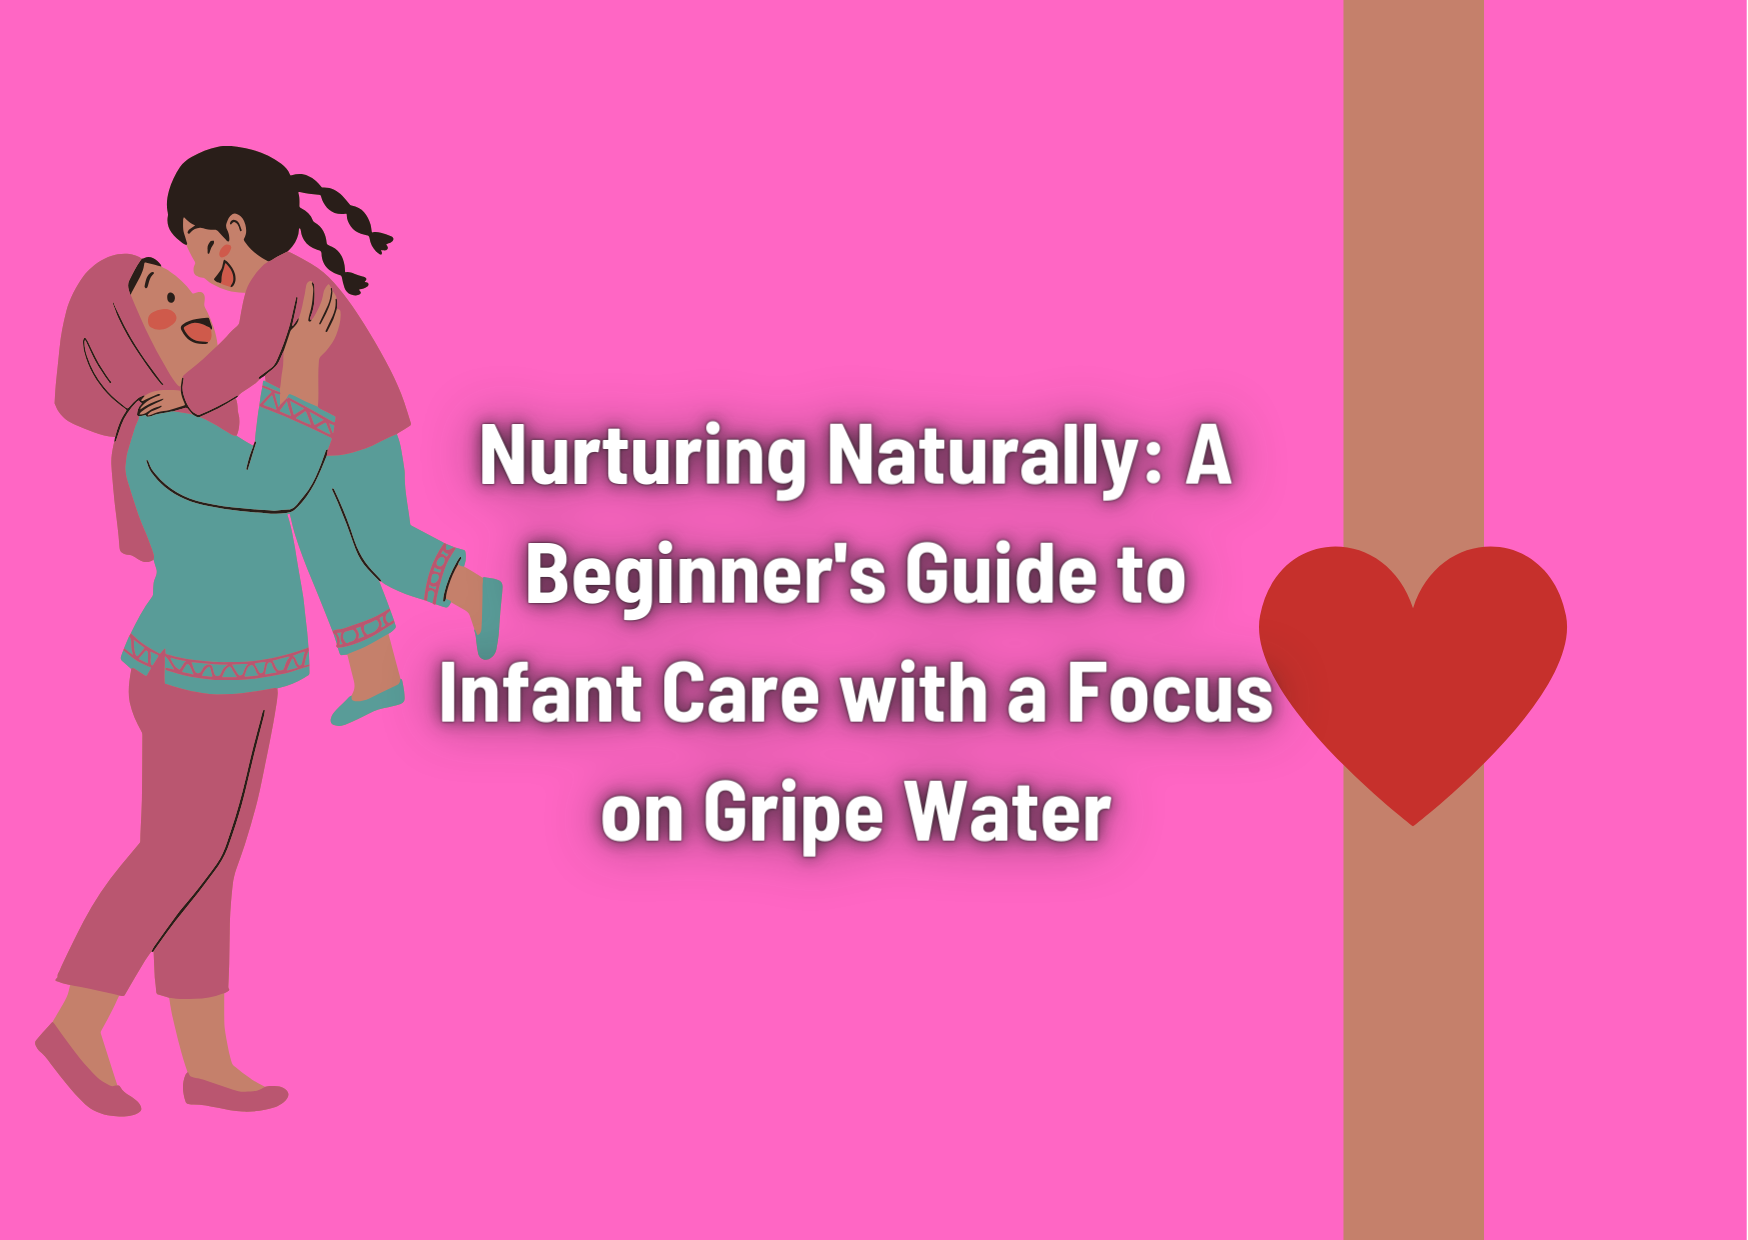 Nurturing Naturally: A Beginner's Guide to Infant Care with a Focus on Gripe Water